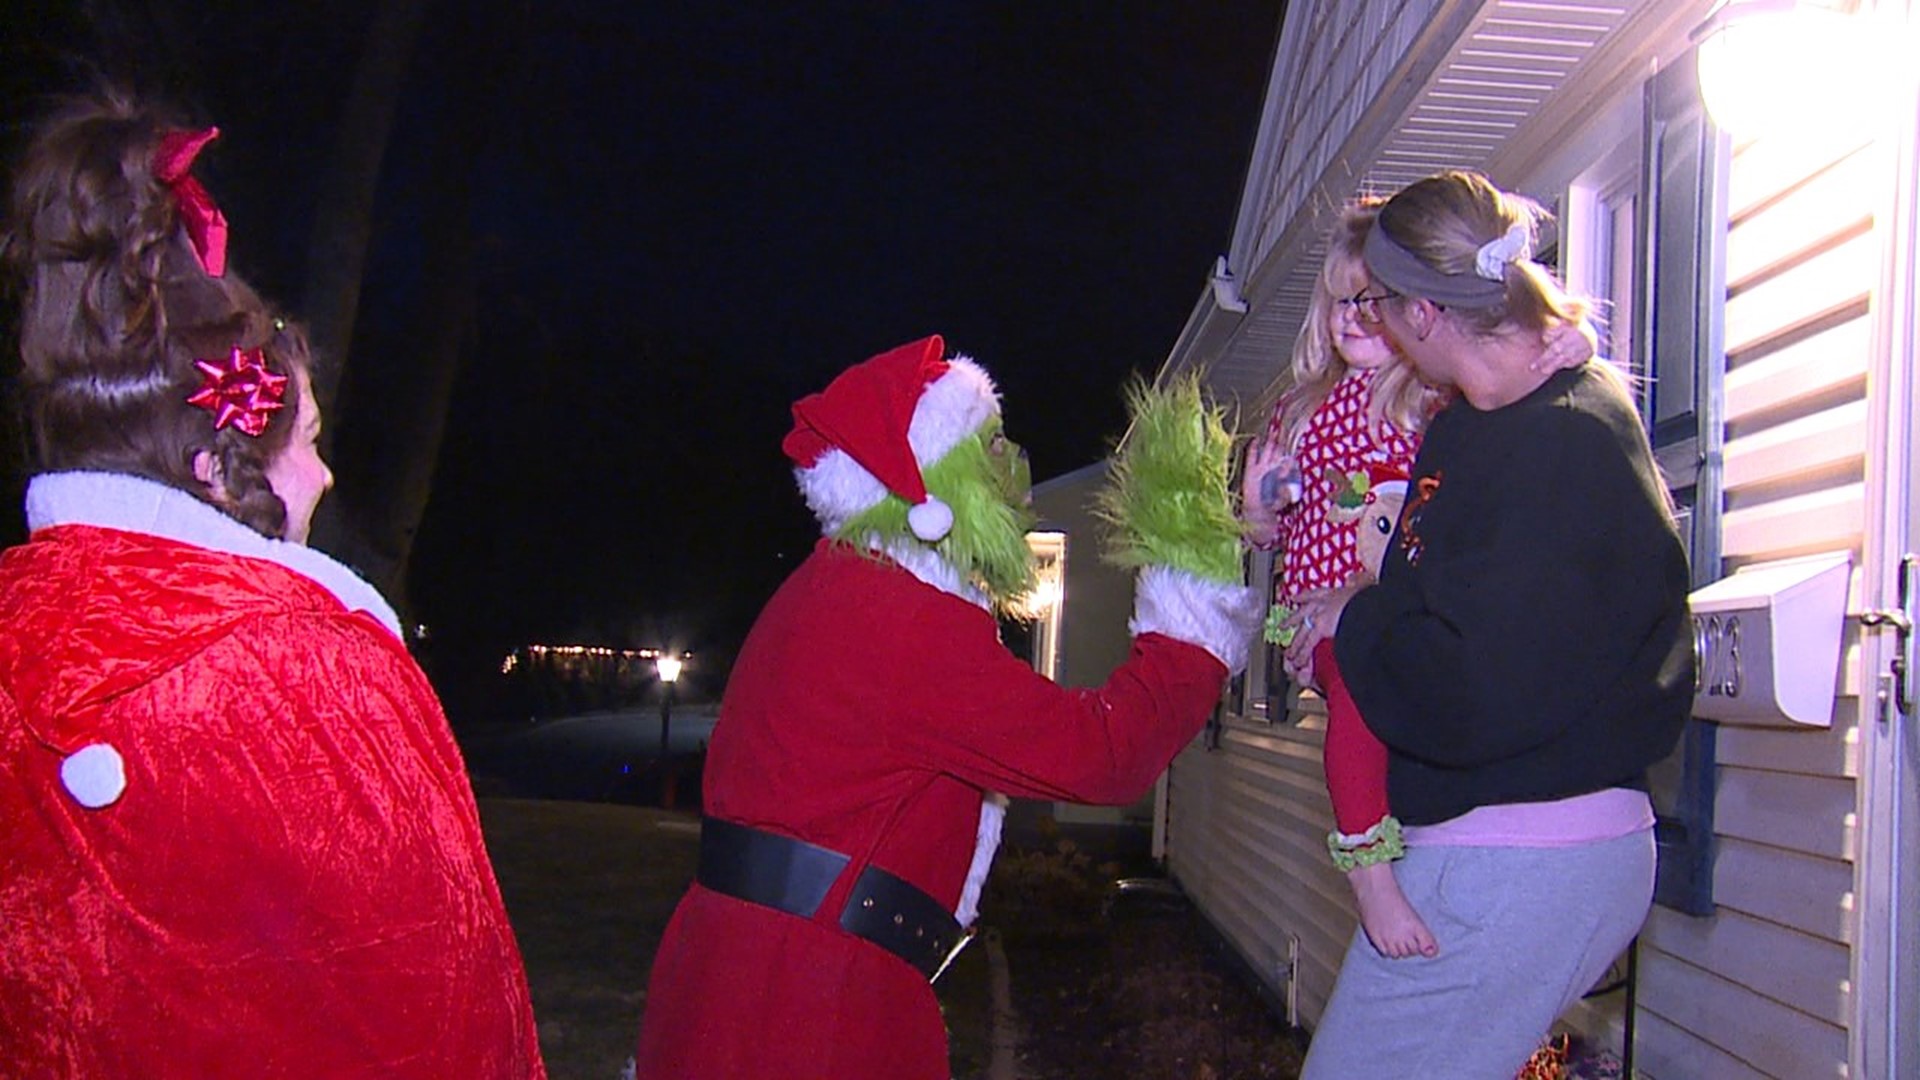 Six nights a week, Steve Pruett dresses up as the Grinch and drives around in a truck decorated with inflatables and Christmas lights, handing out toys to kids.